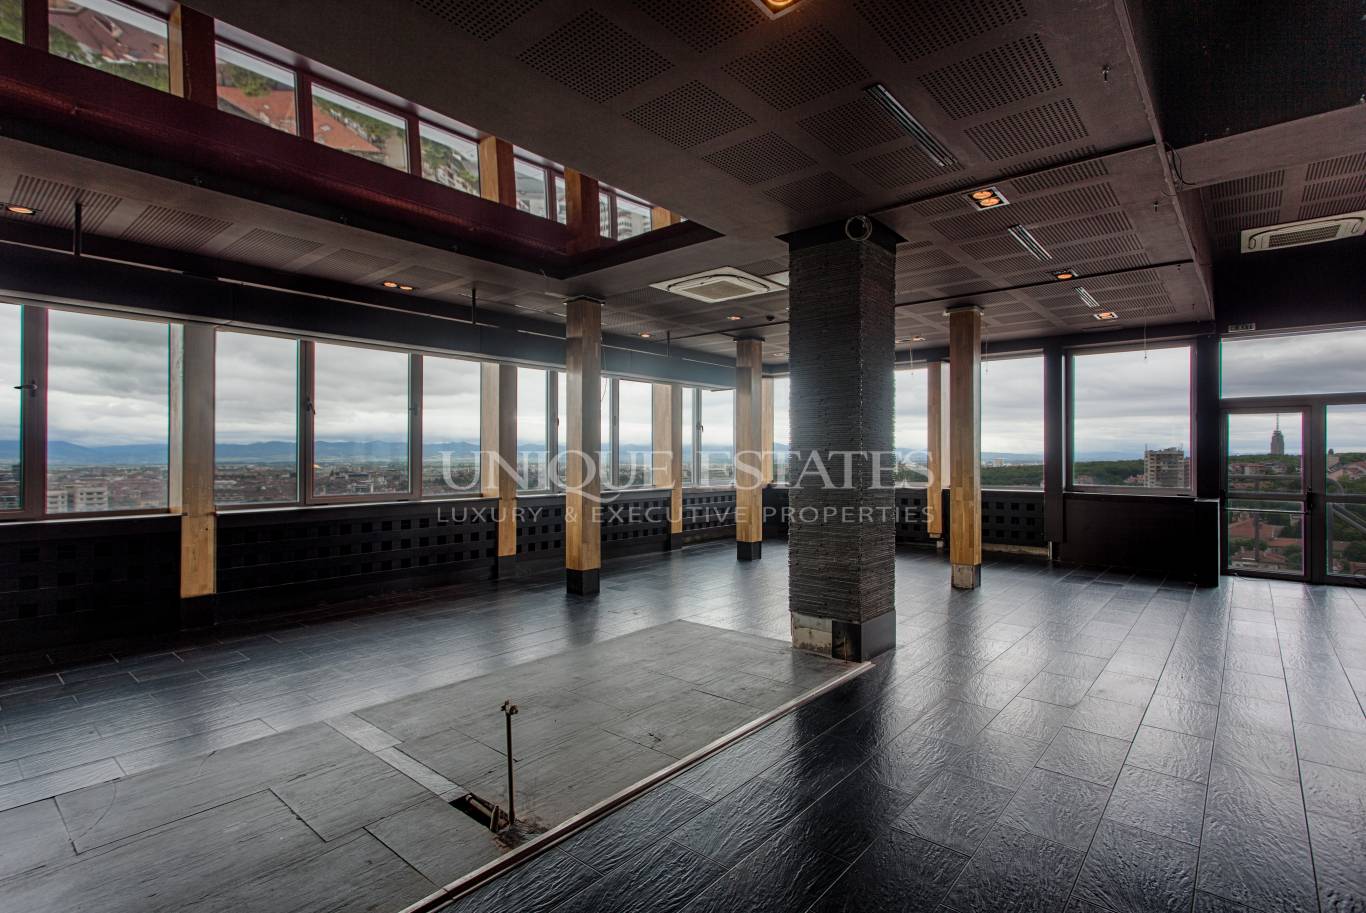 Commercial property for rent in Sofia, Lozenets with listing ID: K14372 - image 2